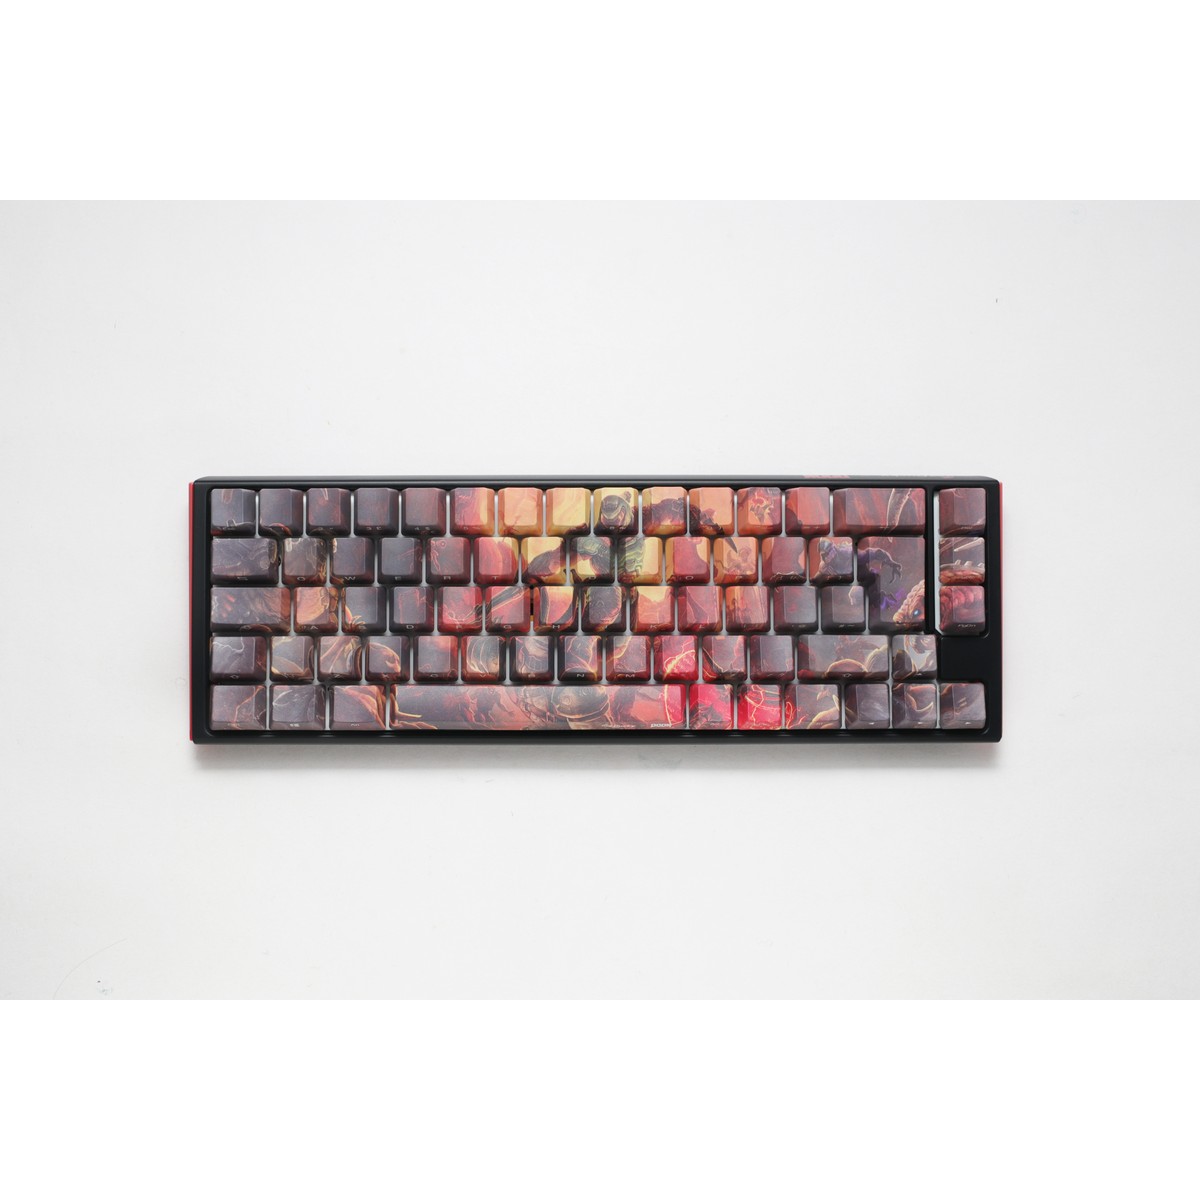 Ducky x DOOM SF 65% Gaming Keyboard Limited Edition Cherry MX Brown Switches UK